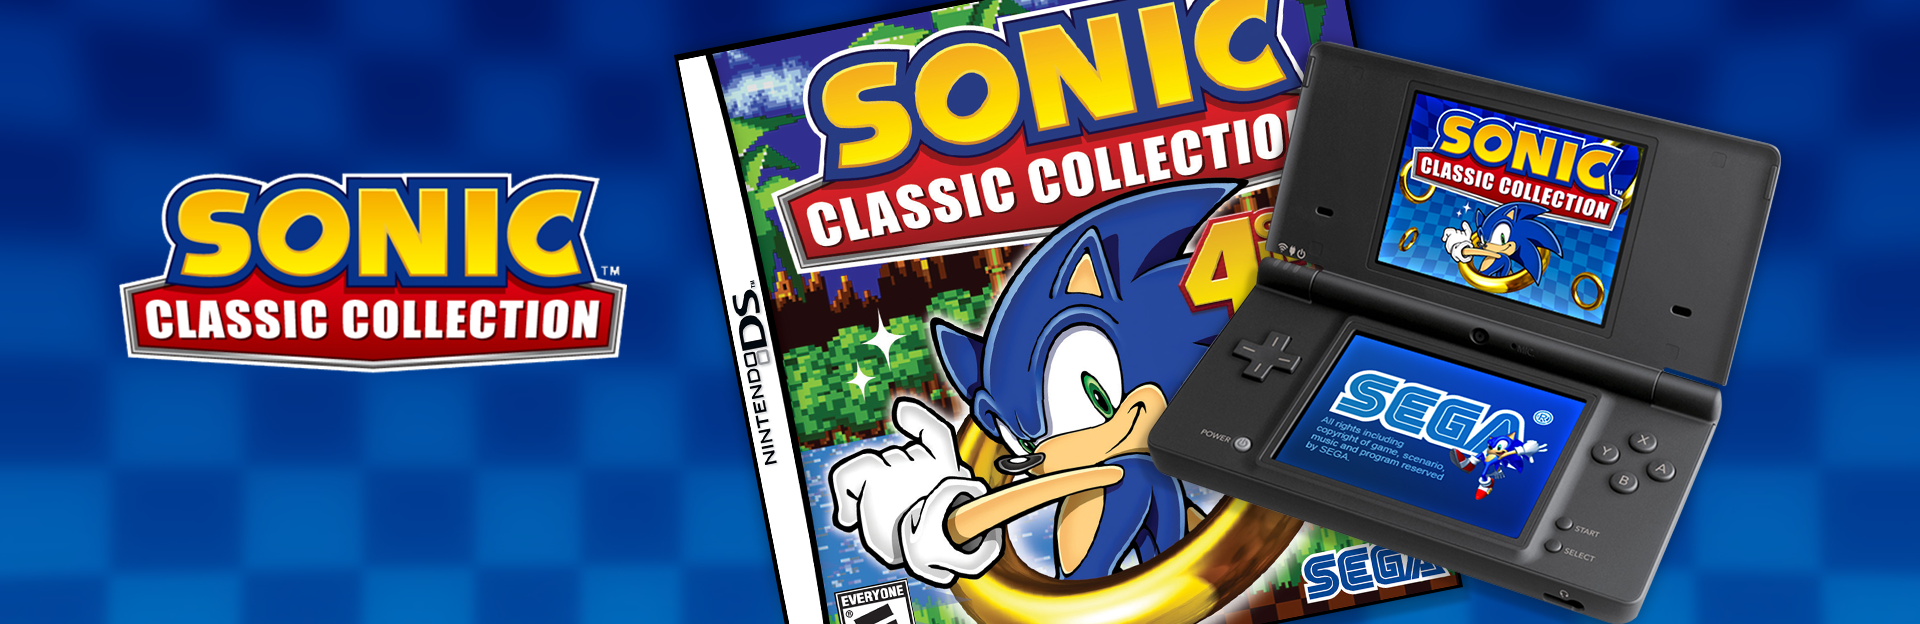 sonic classic collection nds